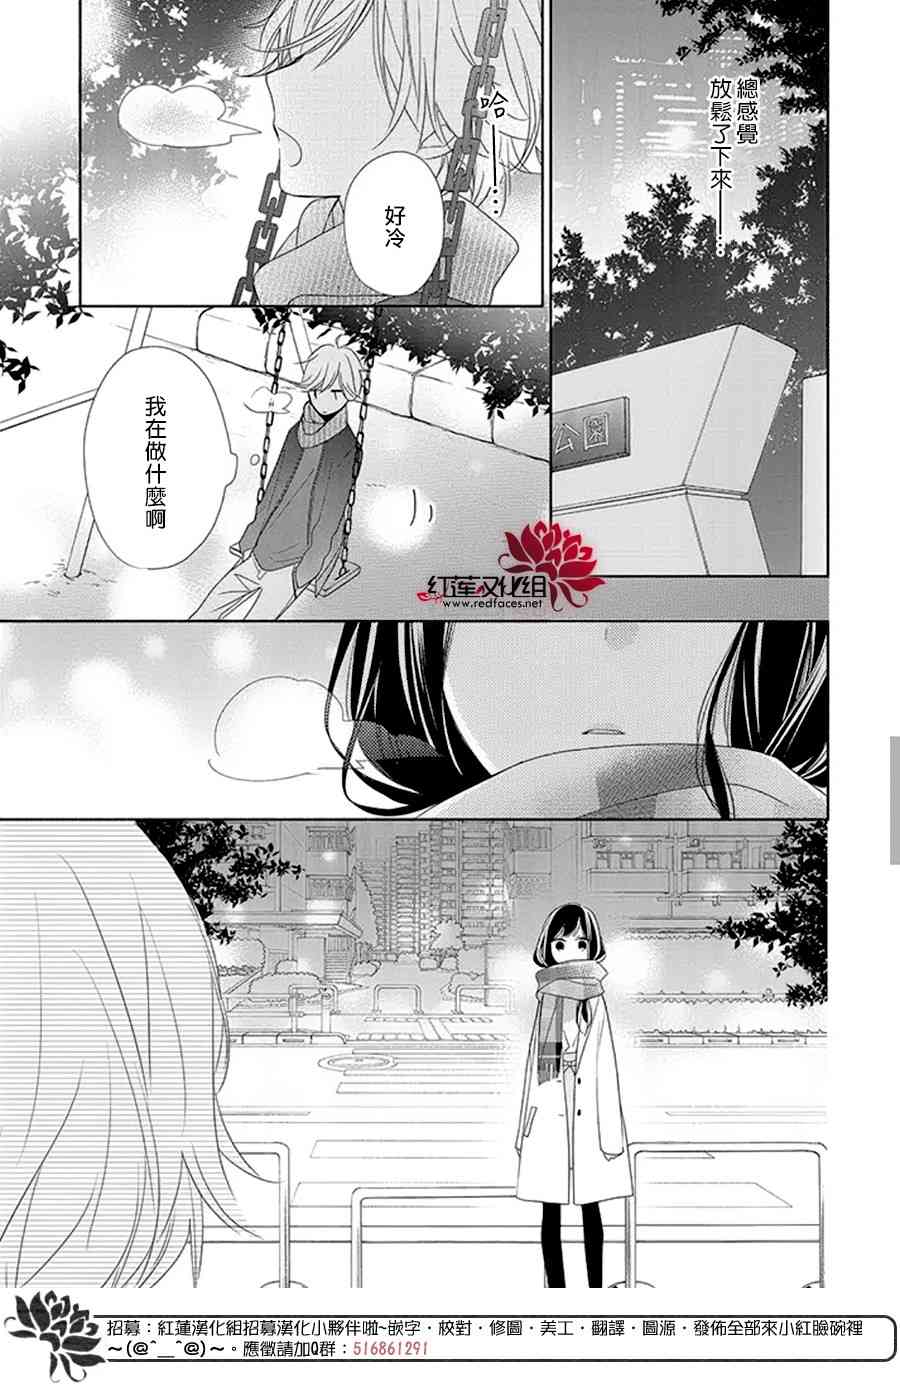 If given a second chance - 19話 - 6